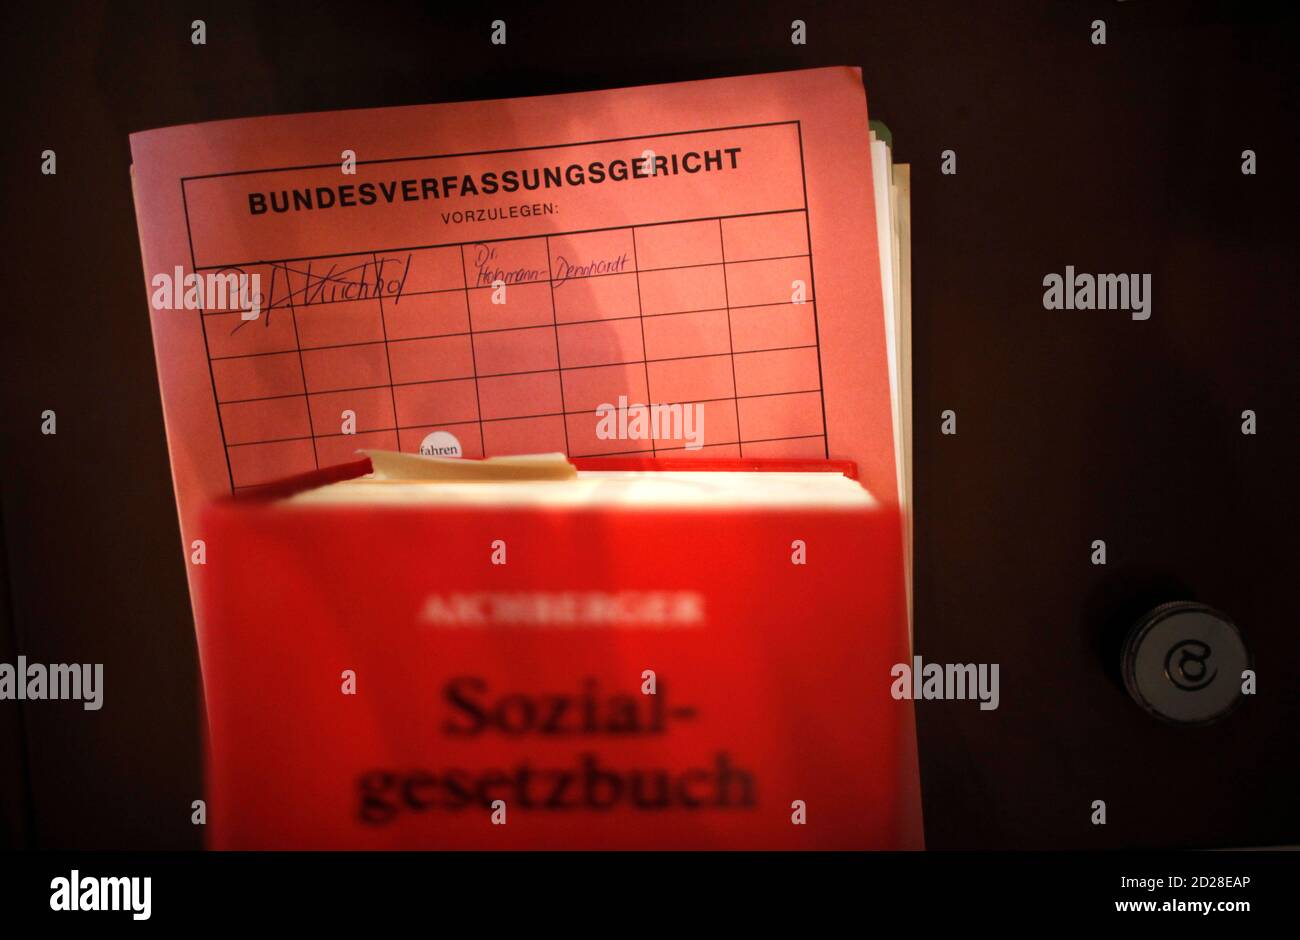 A social code book of German law (sozialgesetzbuch) and constitutional court files are pictured before a hearing about child allowances included in Hartz IV national unemployment benefits, at a court in Karlsruhe October 20, 2009. REUTERS/Johannes Eisele  (GERMANY CRIME LAW POLITICS IMAGES OF THE DAY) Stock Photo